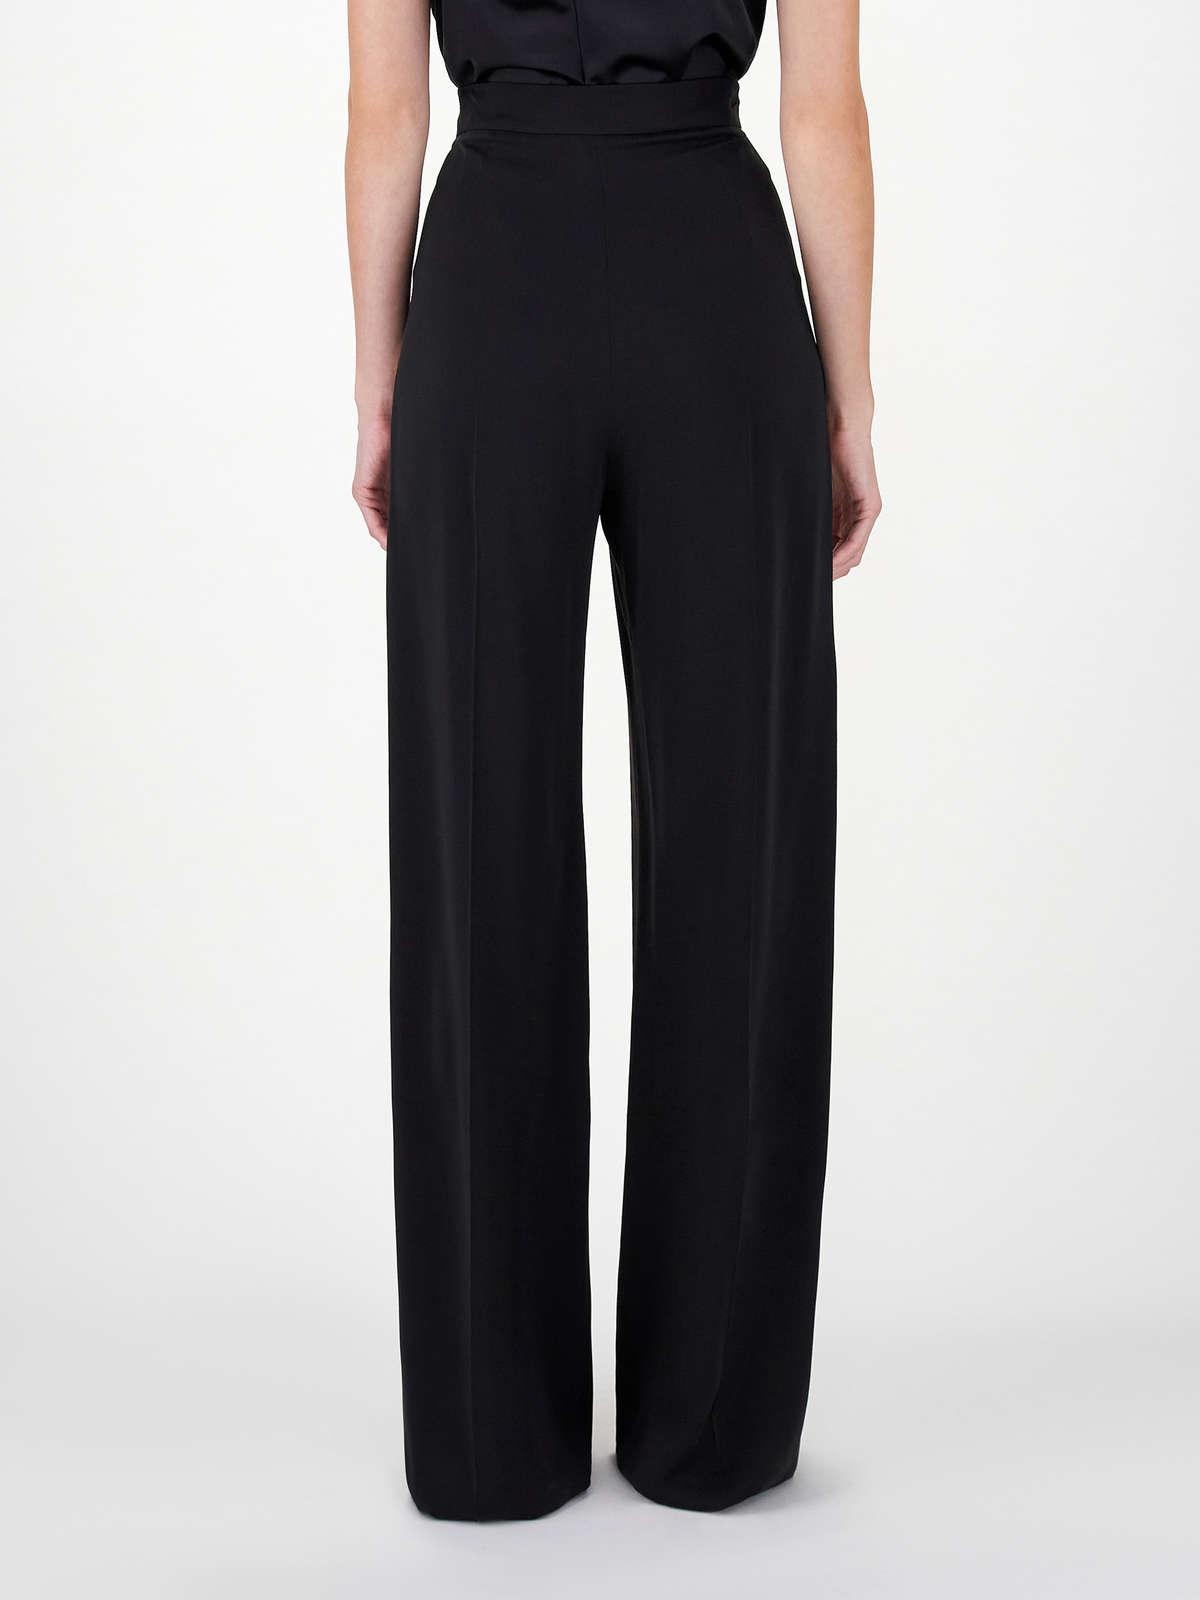 Womens Max Mara Trousers And Jeans | Pure Silk Charmeuse Trousers Black